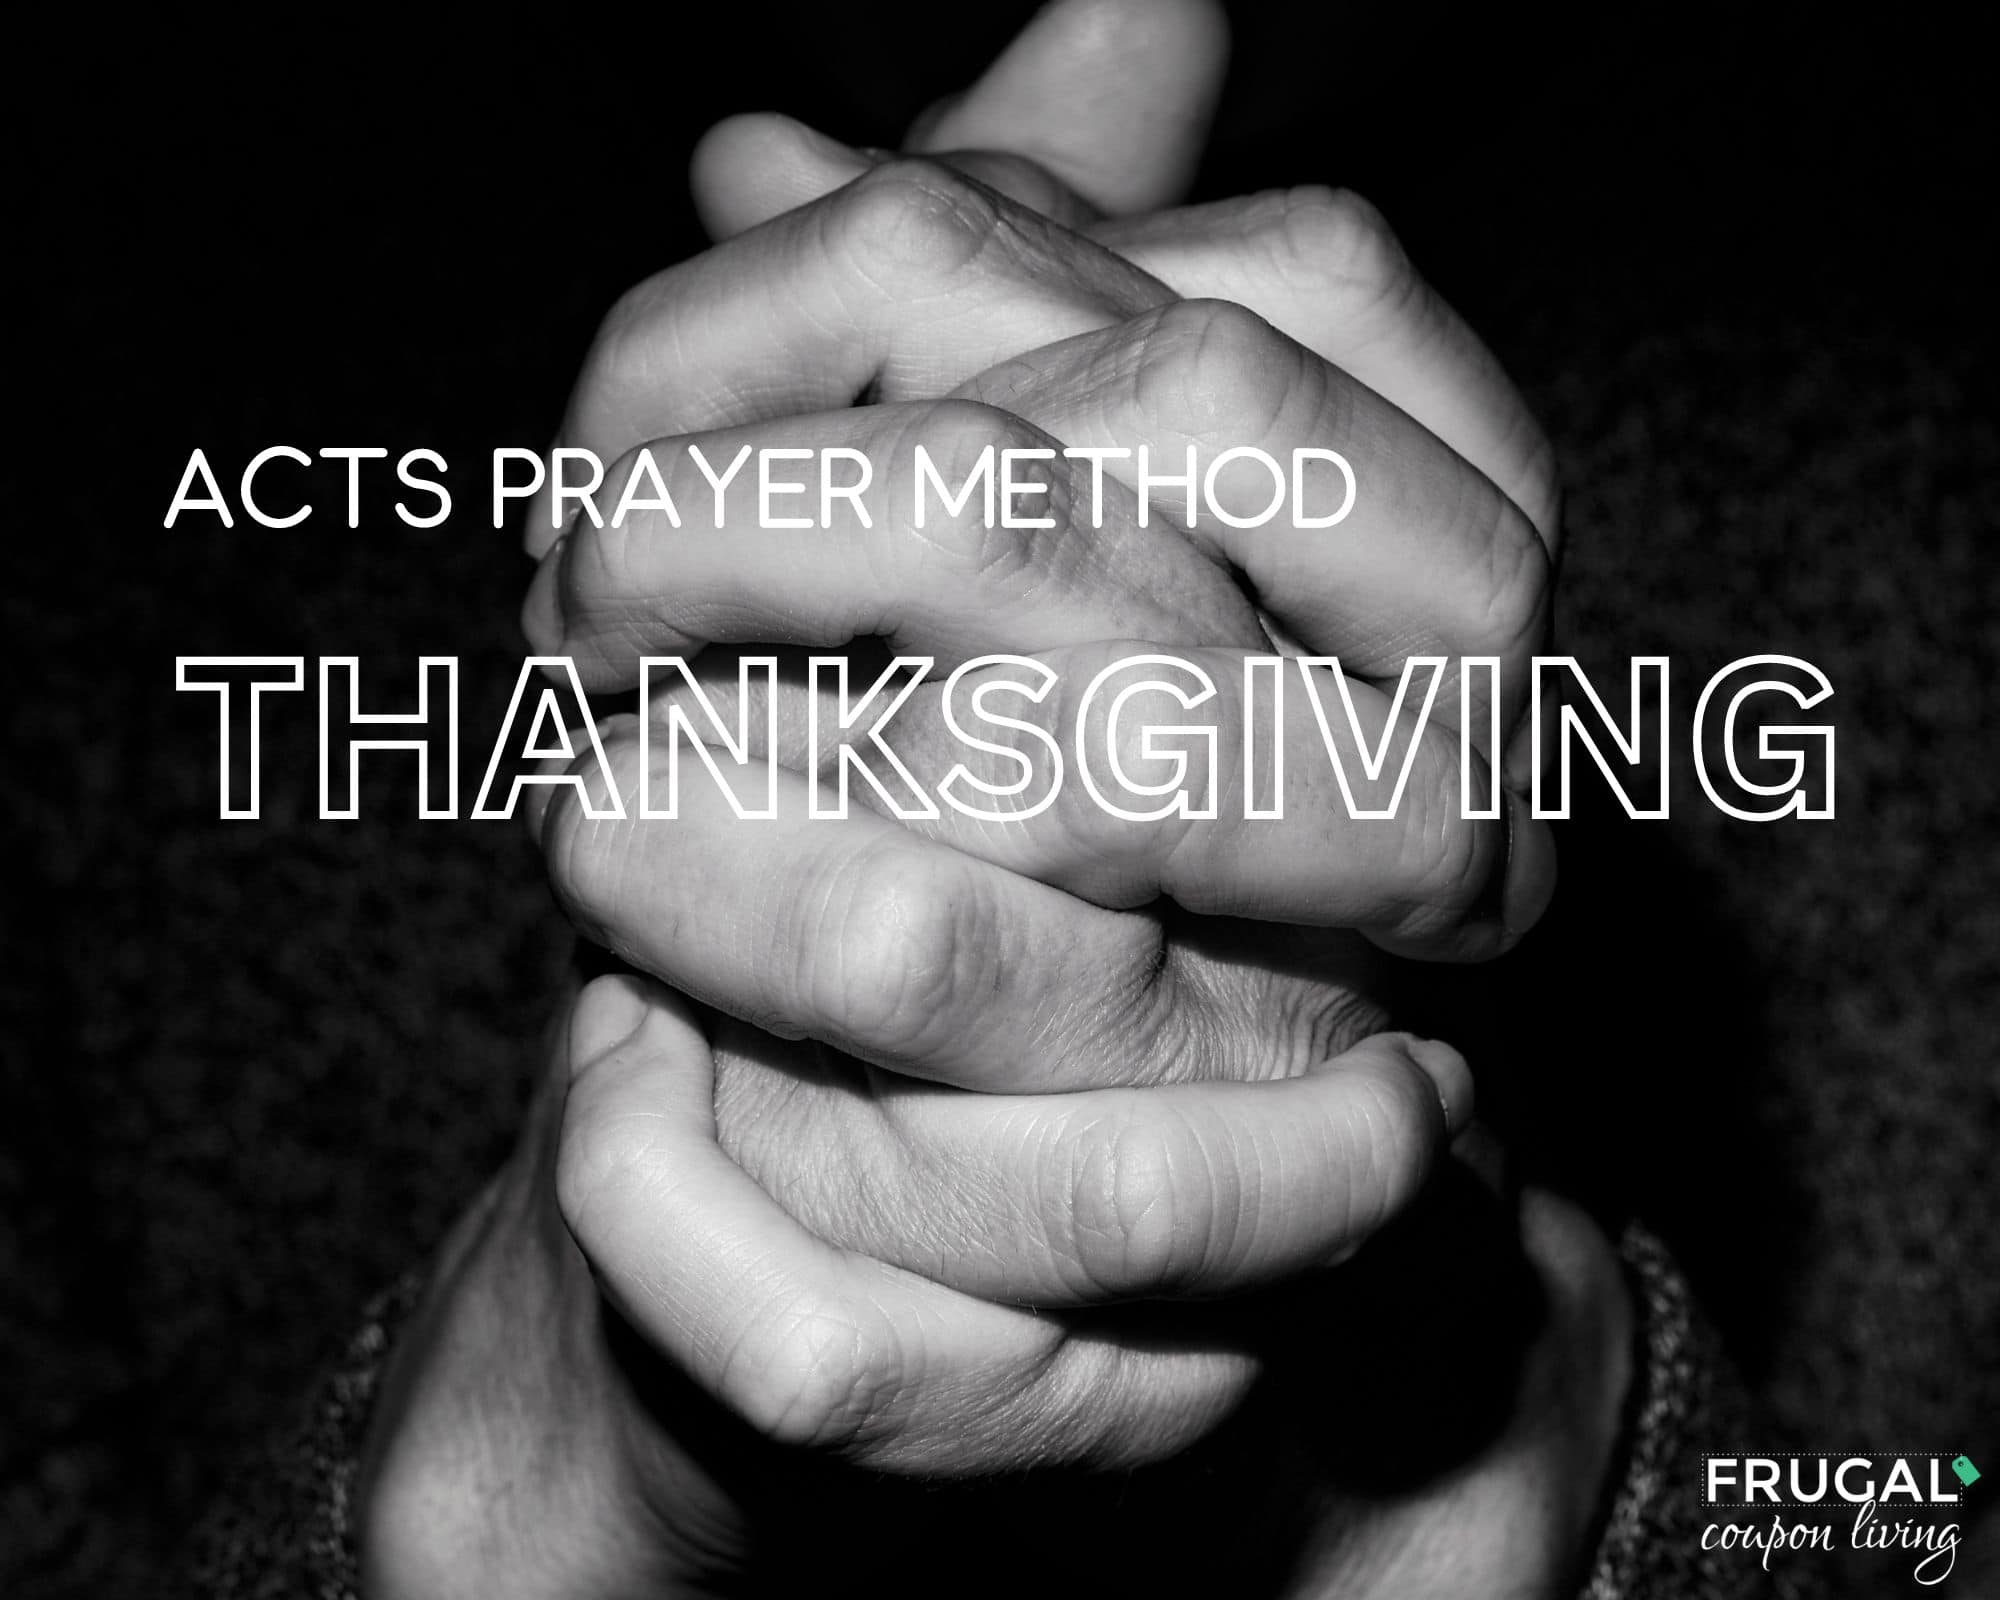 Thanksgiving Part of Acts Prayer